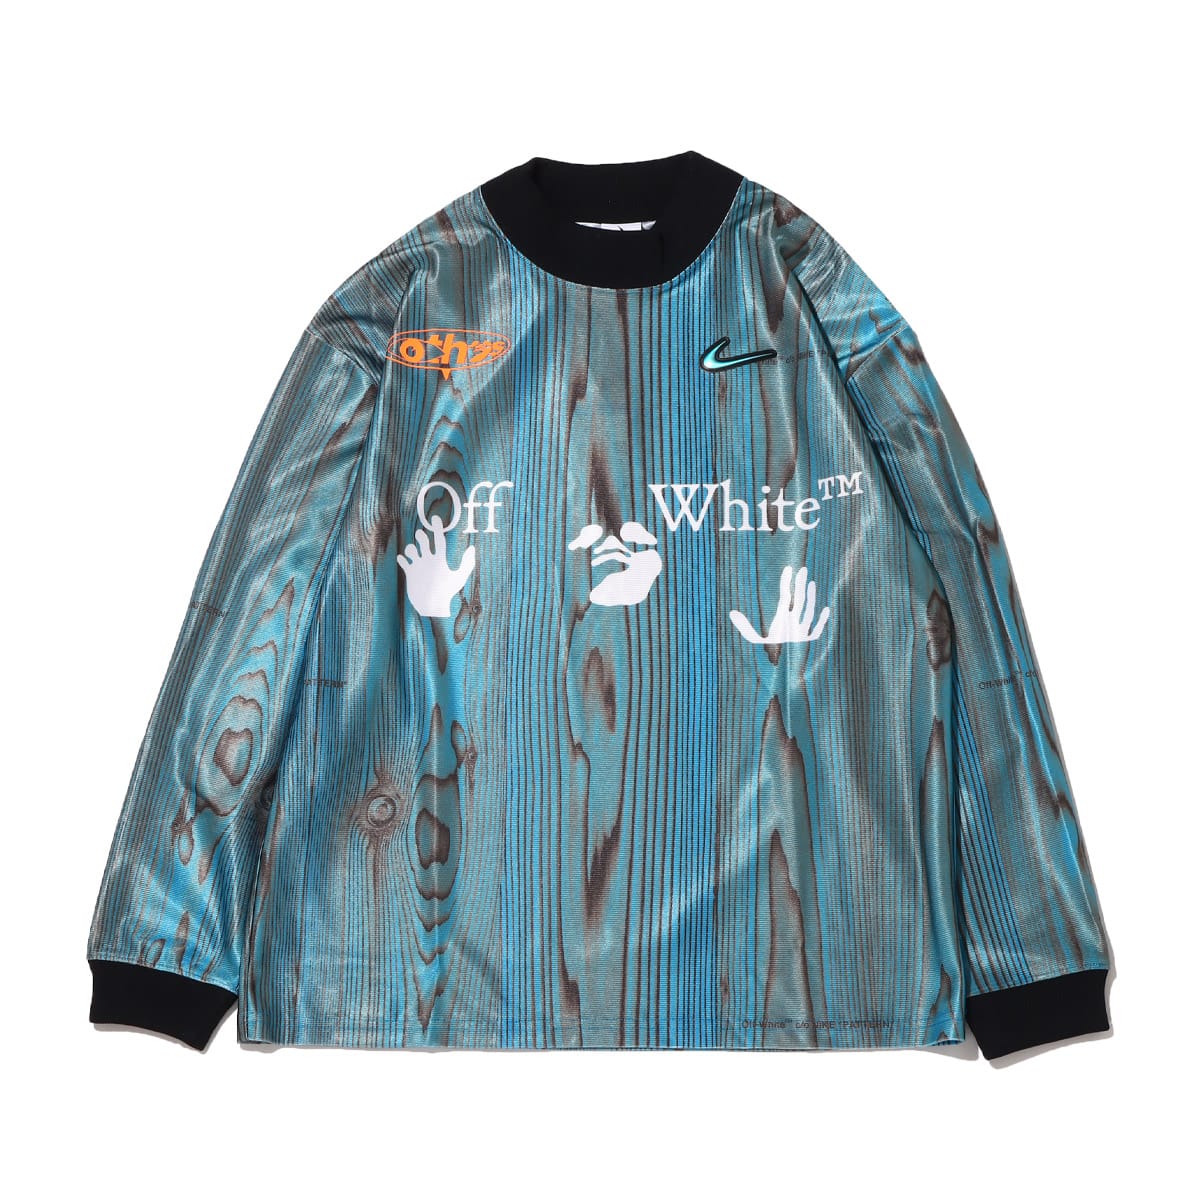 Nike x Off-White™ APPAREL COLLECTION